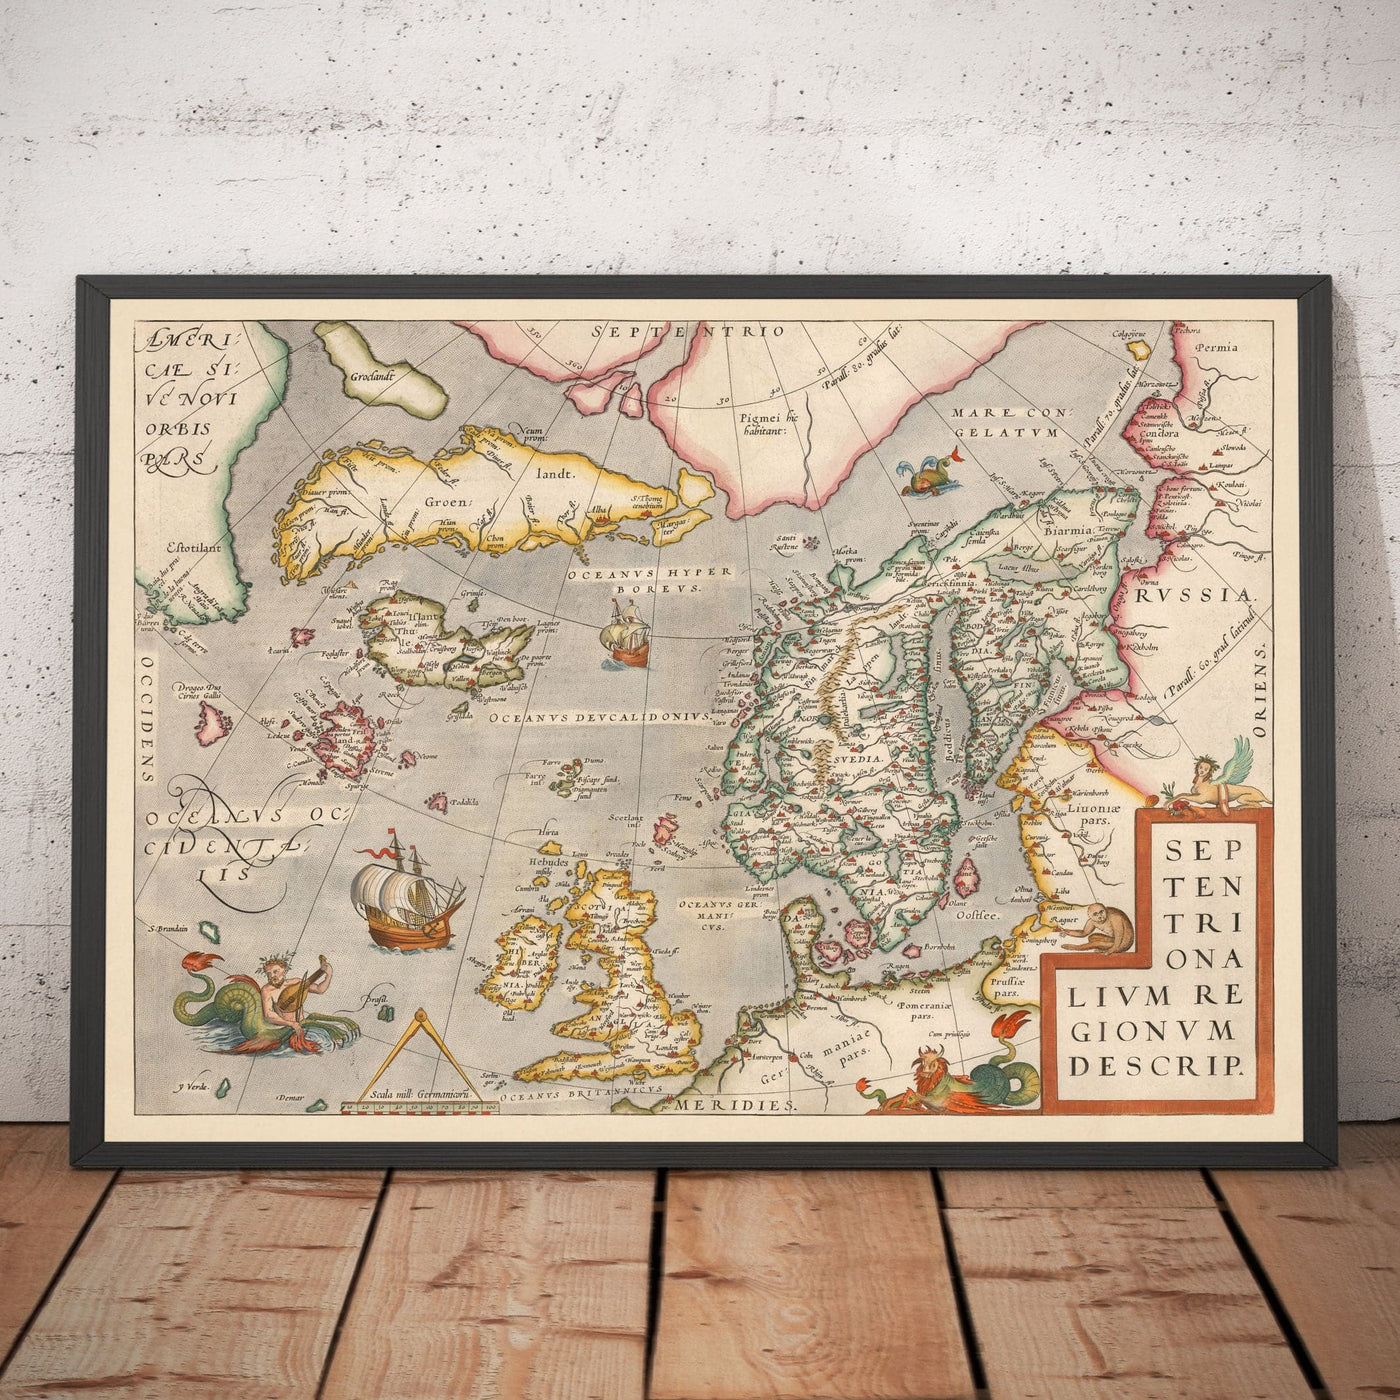 Old Map of North Sea and Atlantic, 1575 with Mythical Frisland by Abraham Ortelius - Scandinavia, British Isles, Iceland, Greenland